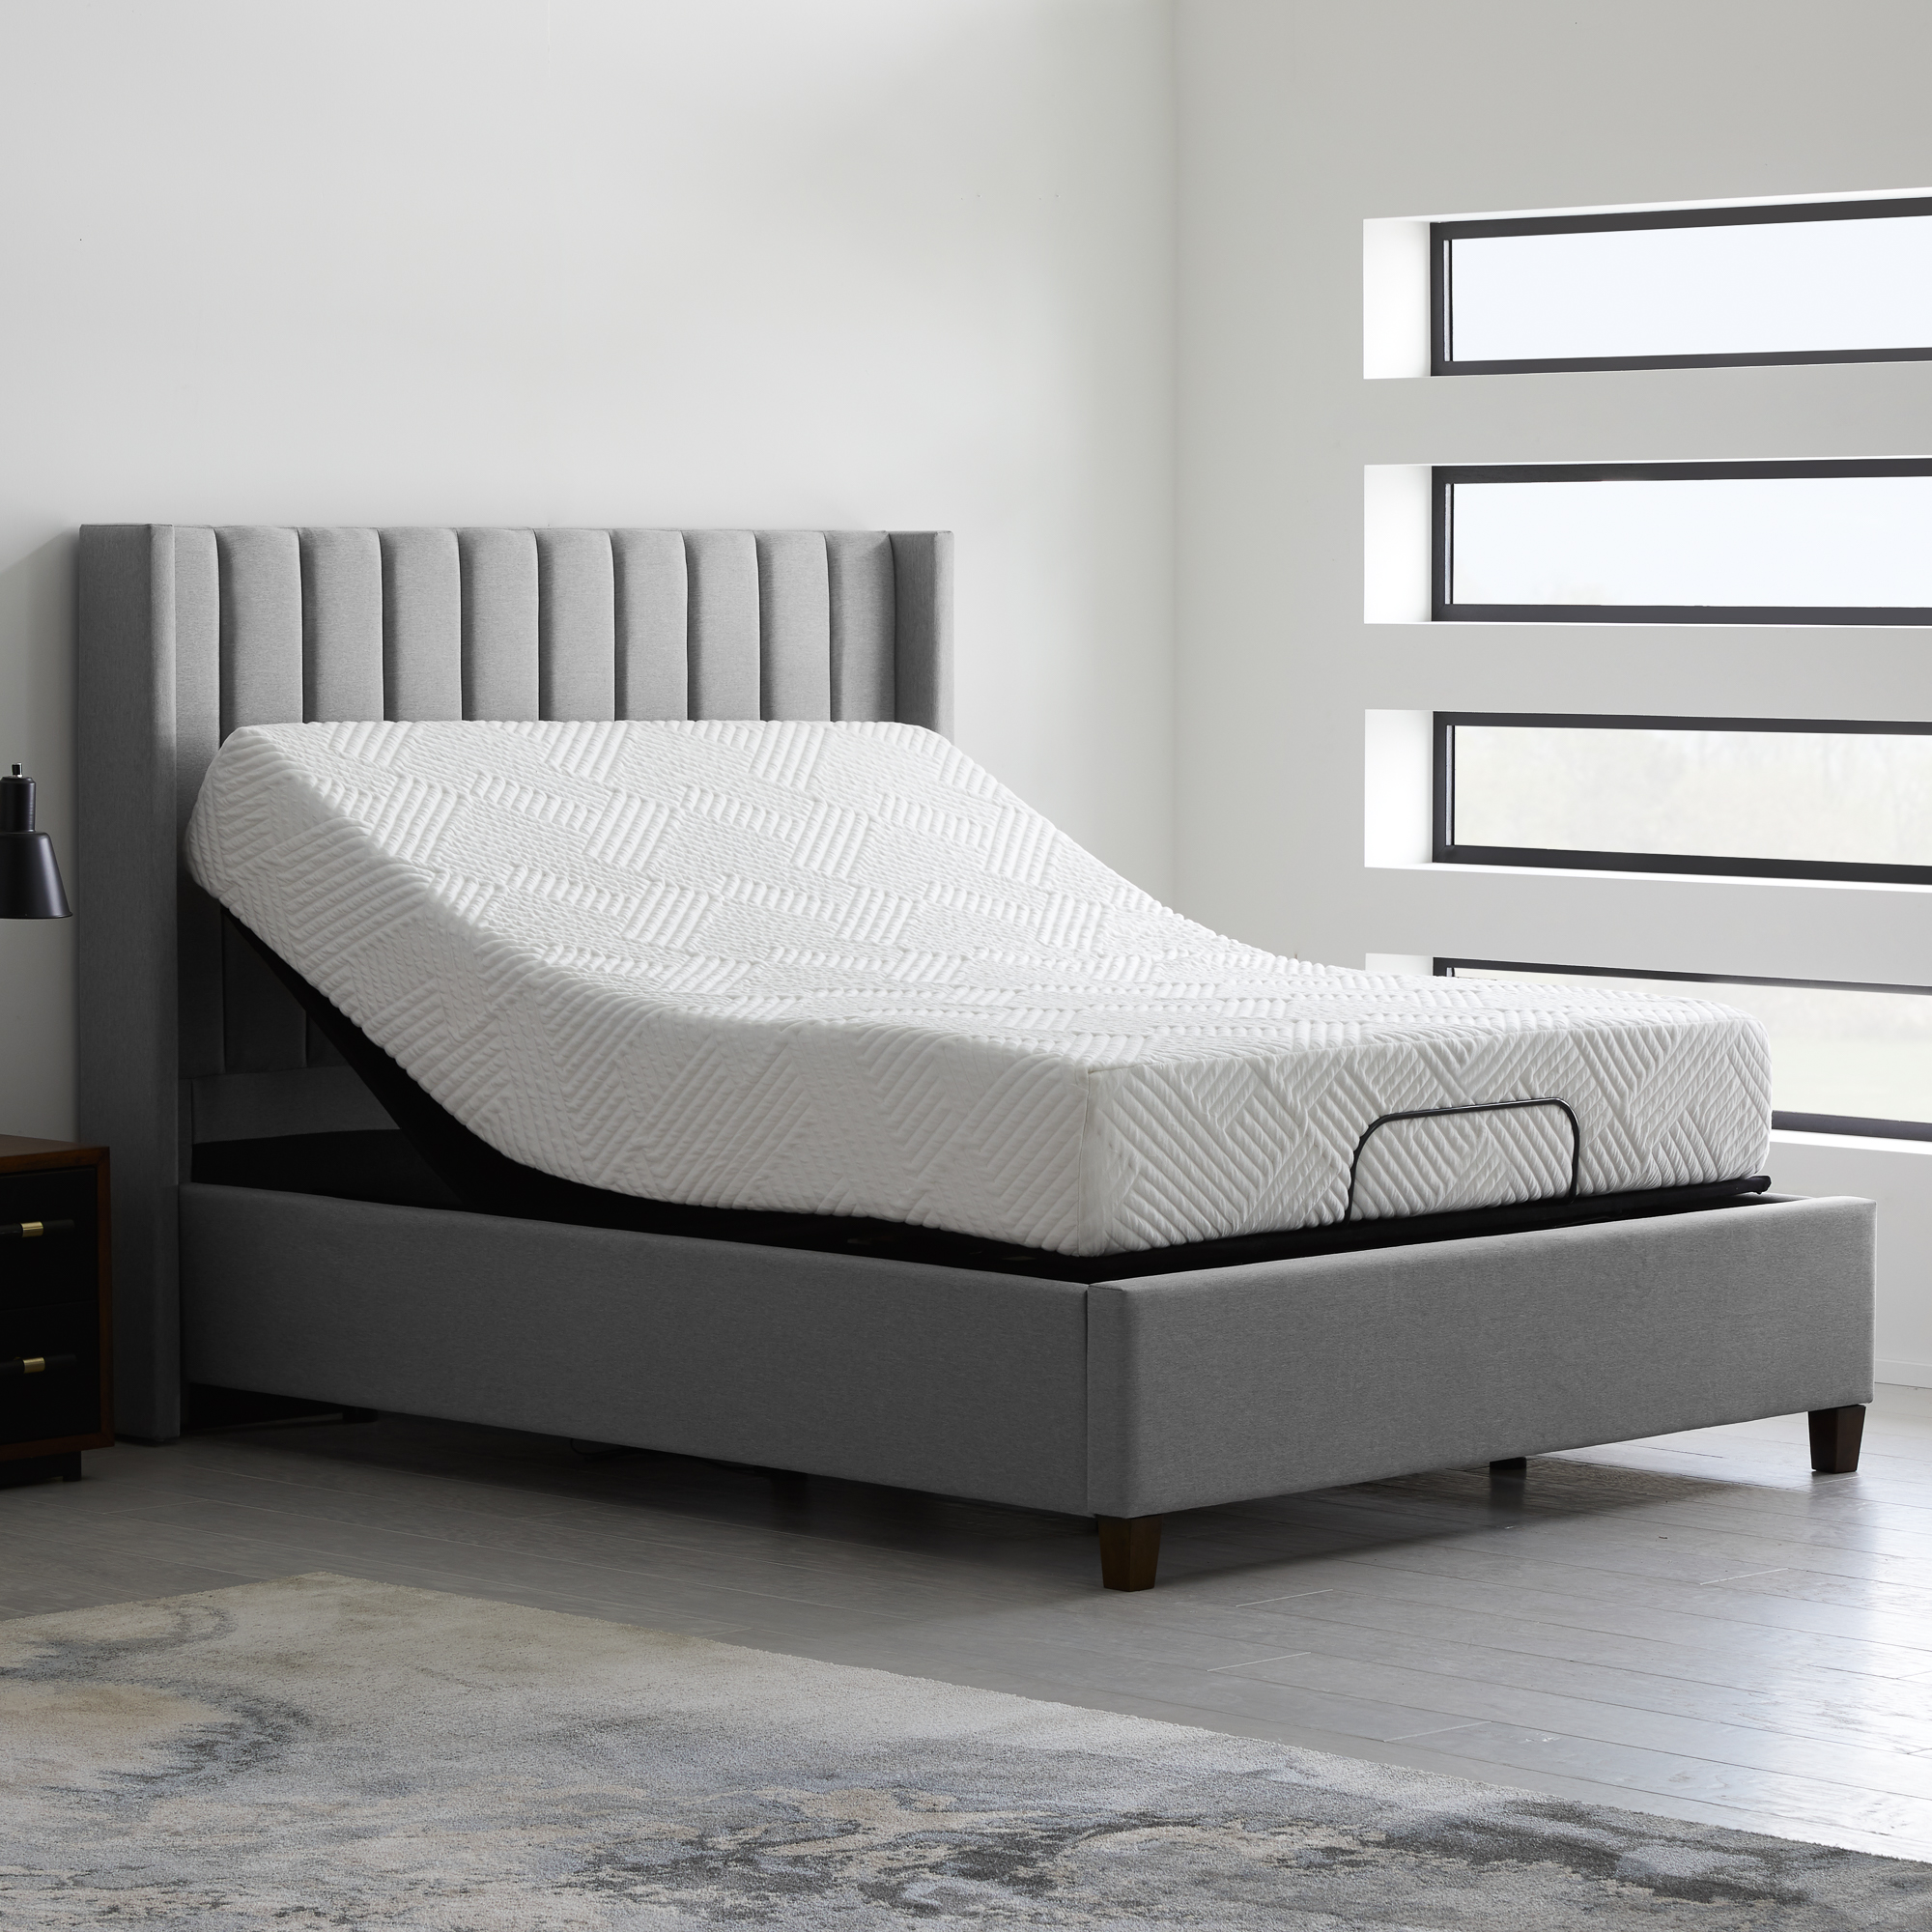 Malouf Structures E255 Adjustable Bed, Malouf Adjustable Bed Frame Reviews